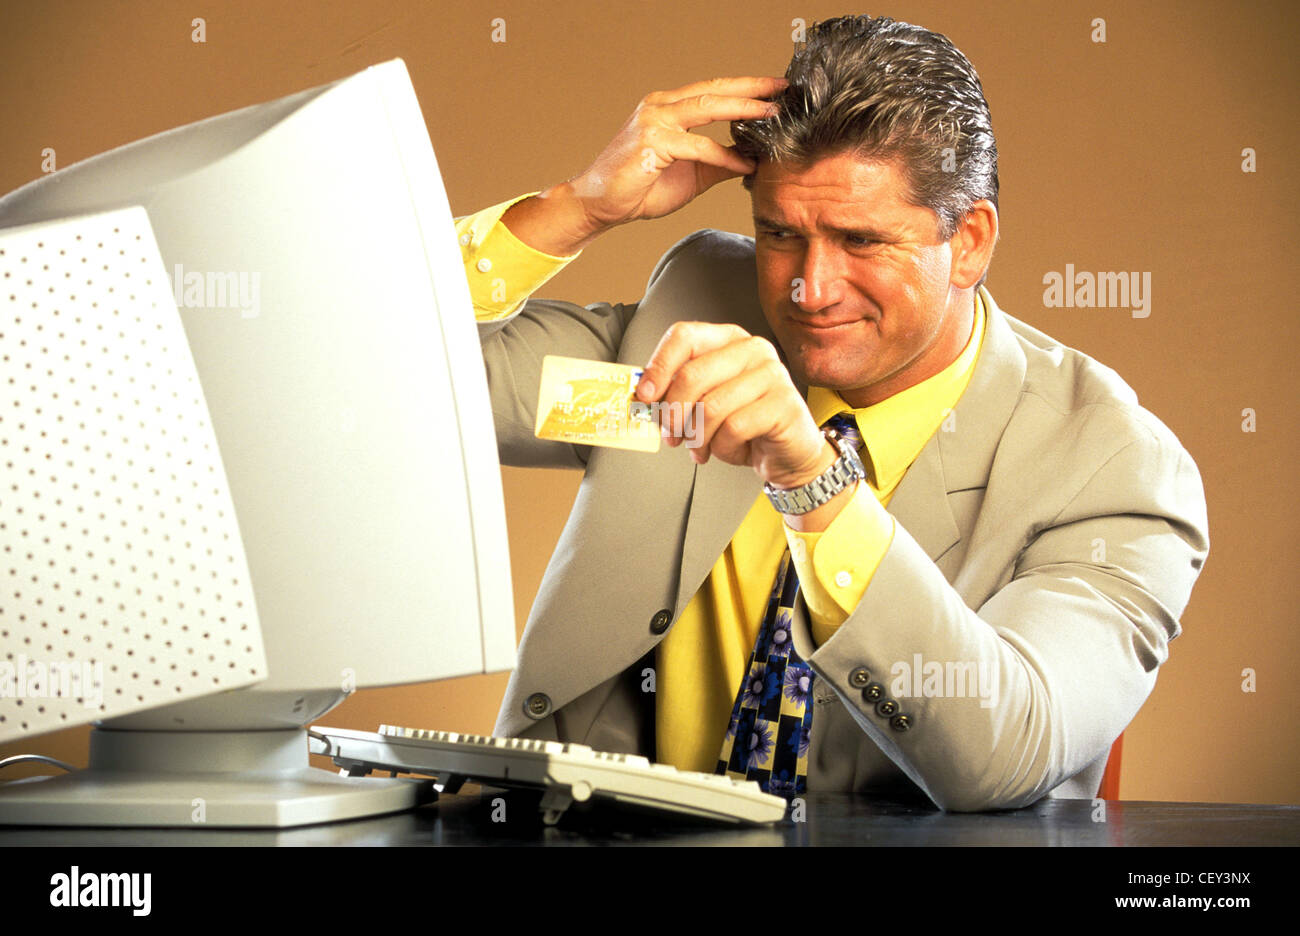 Male wearing pale suit yellow shirt and patterned tie looking at computer monithand to head, holding credit card looking Stock Photo